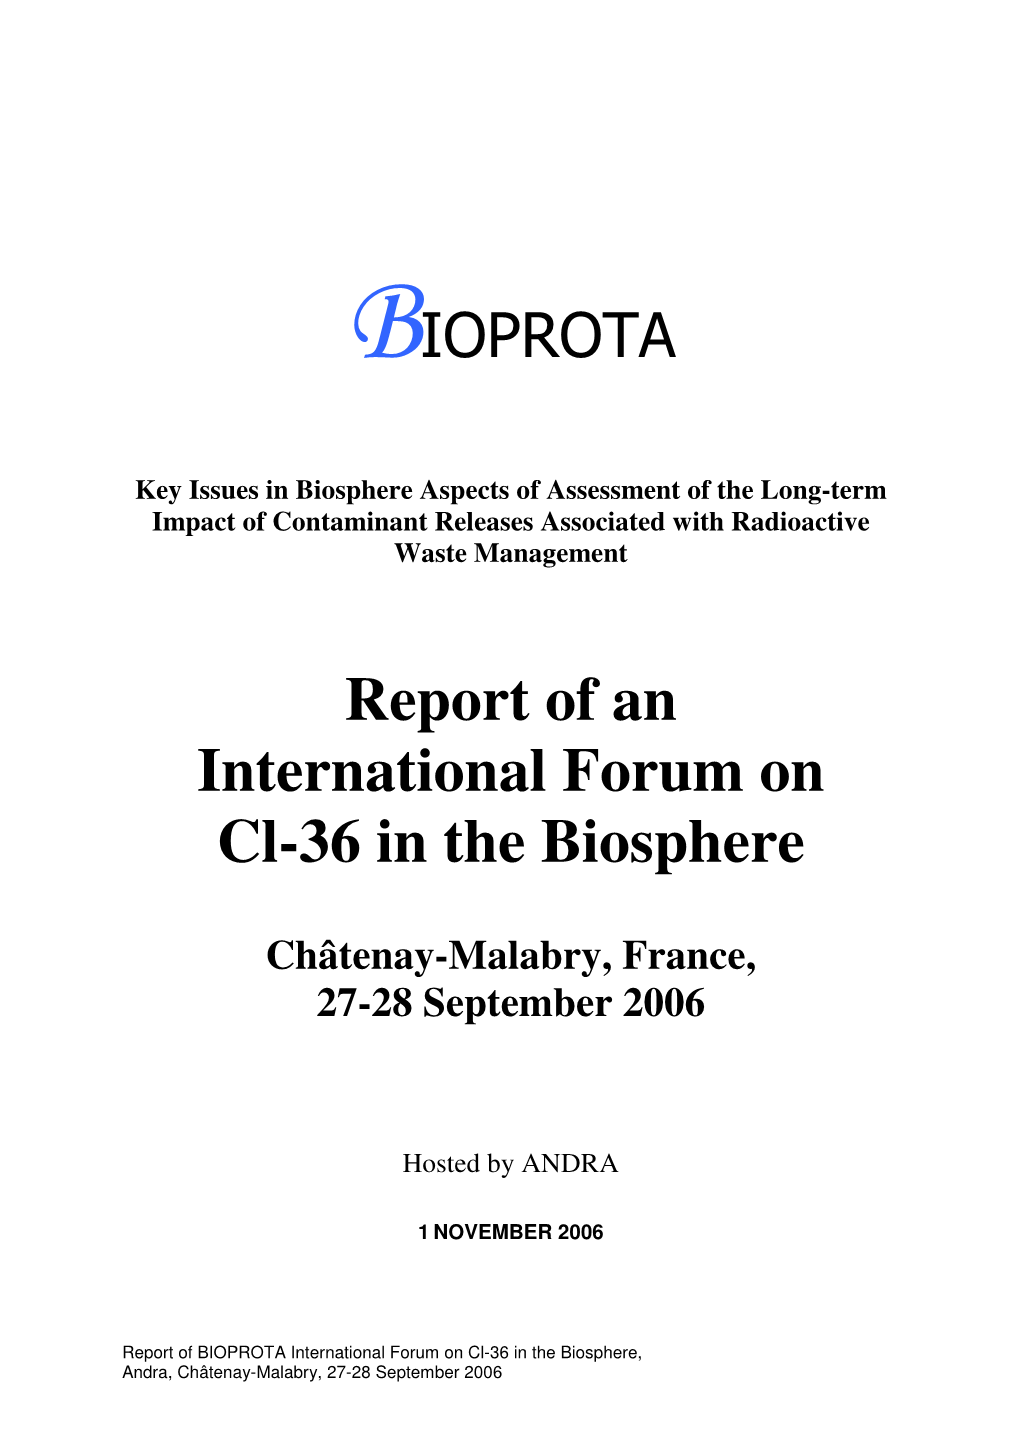 Report of an International Forum on Cl-36 in the Biosphere, Châtenay